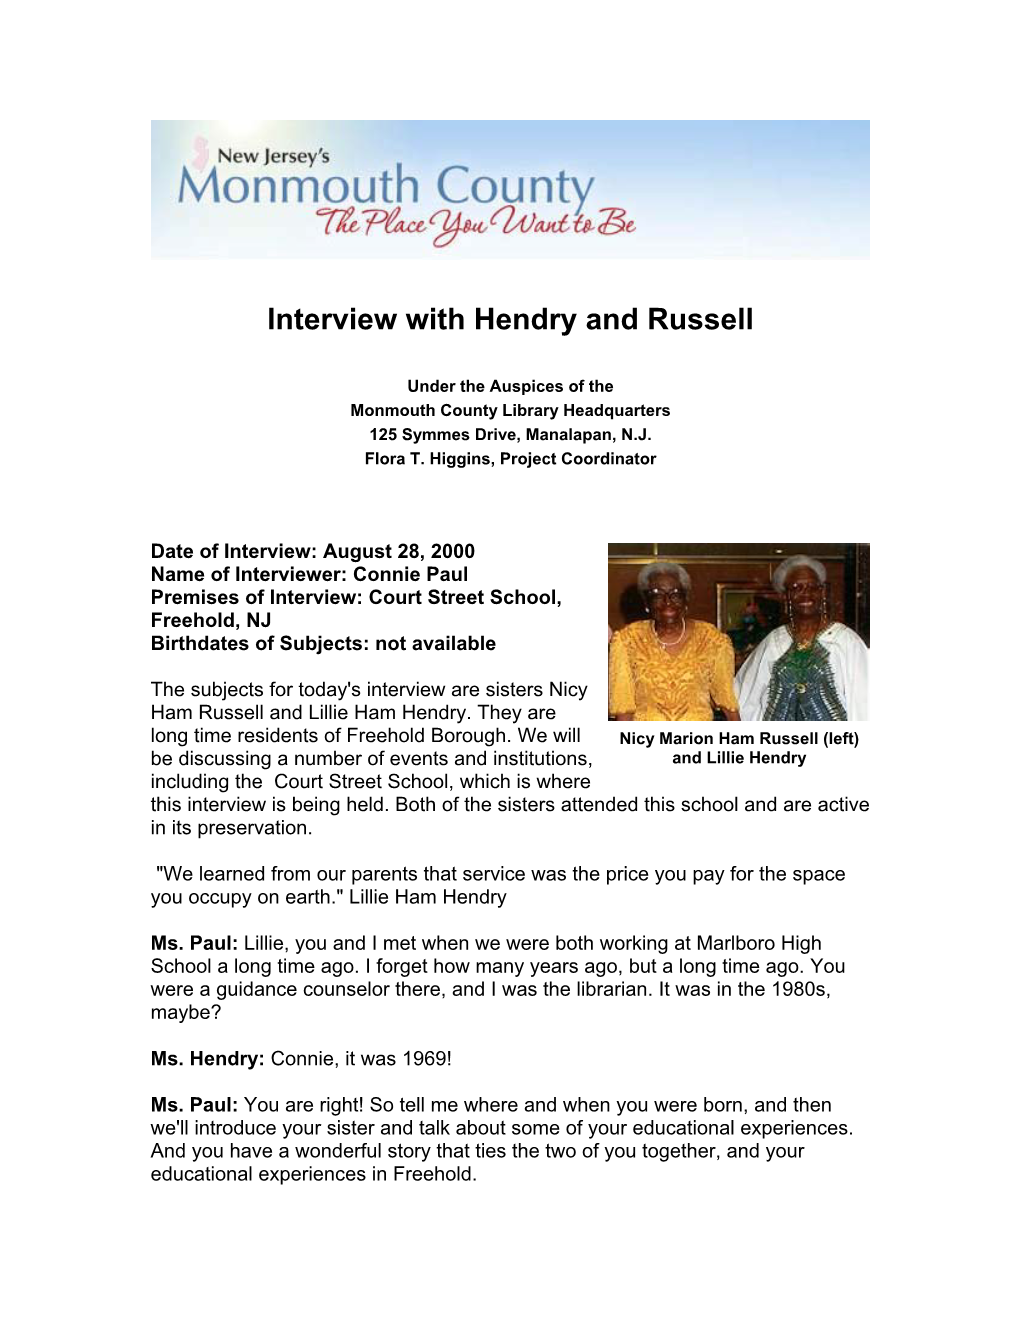 Interview with Hendry and Russell